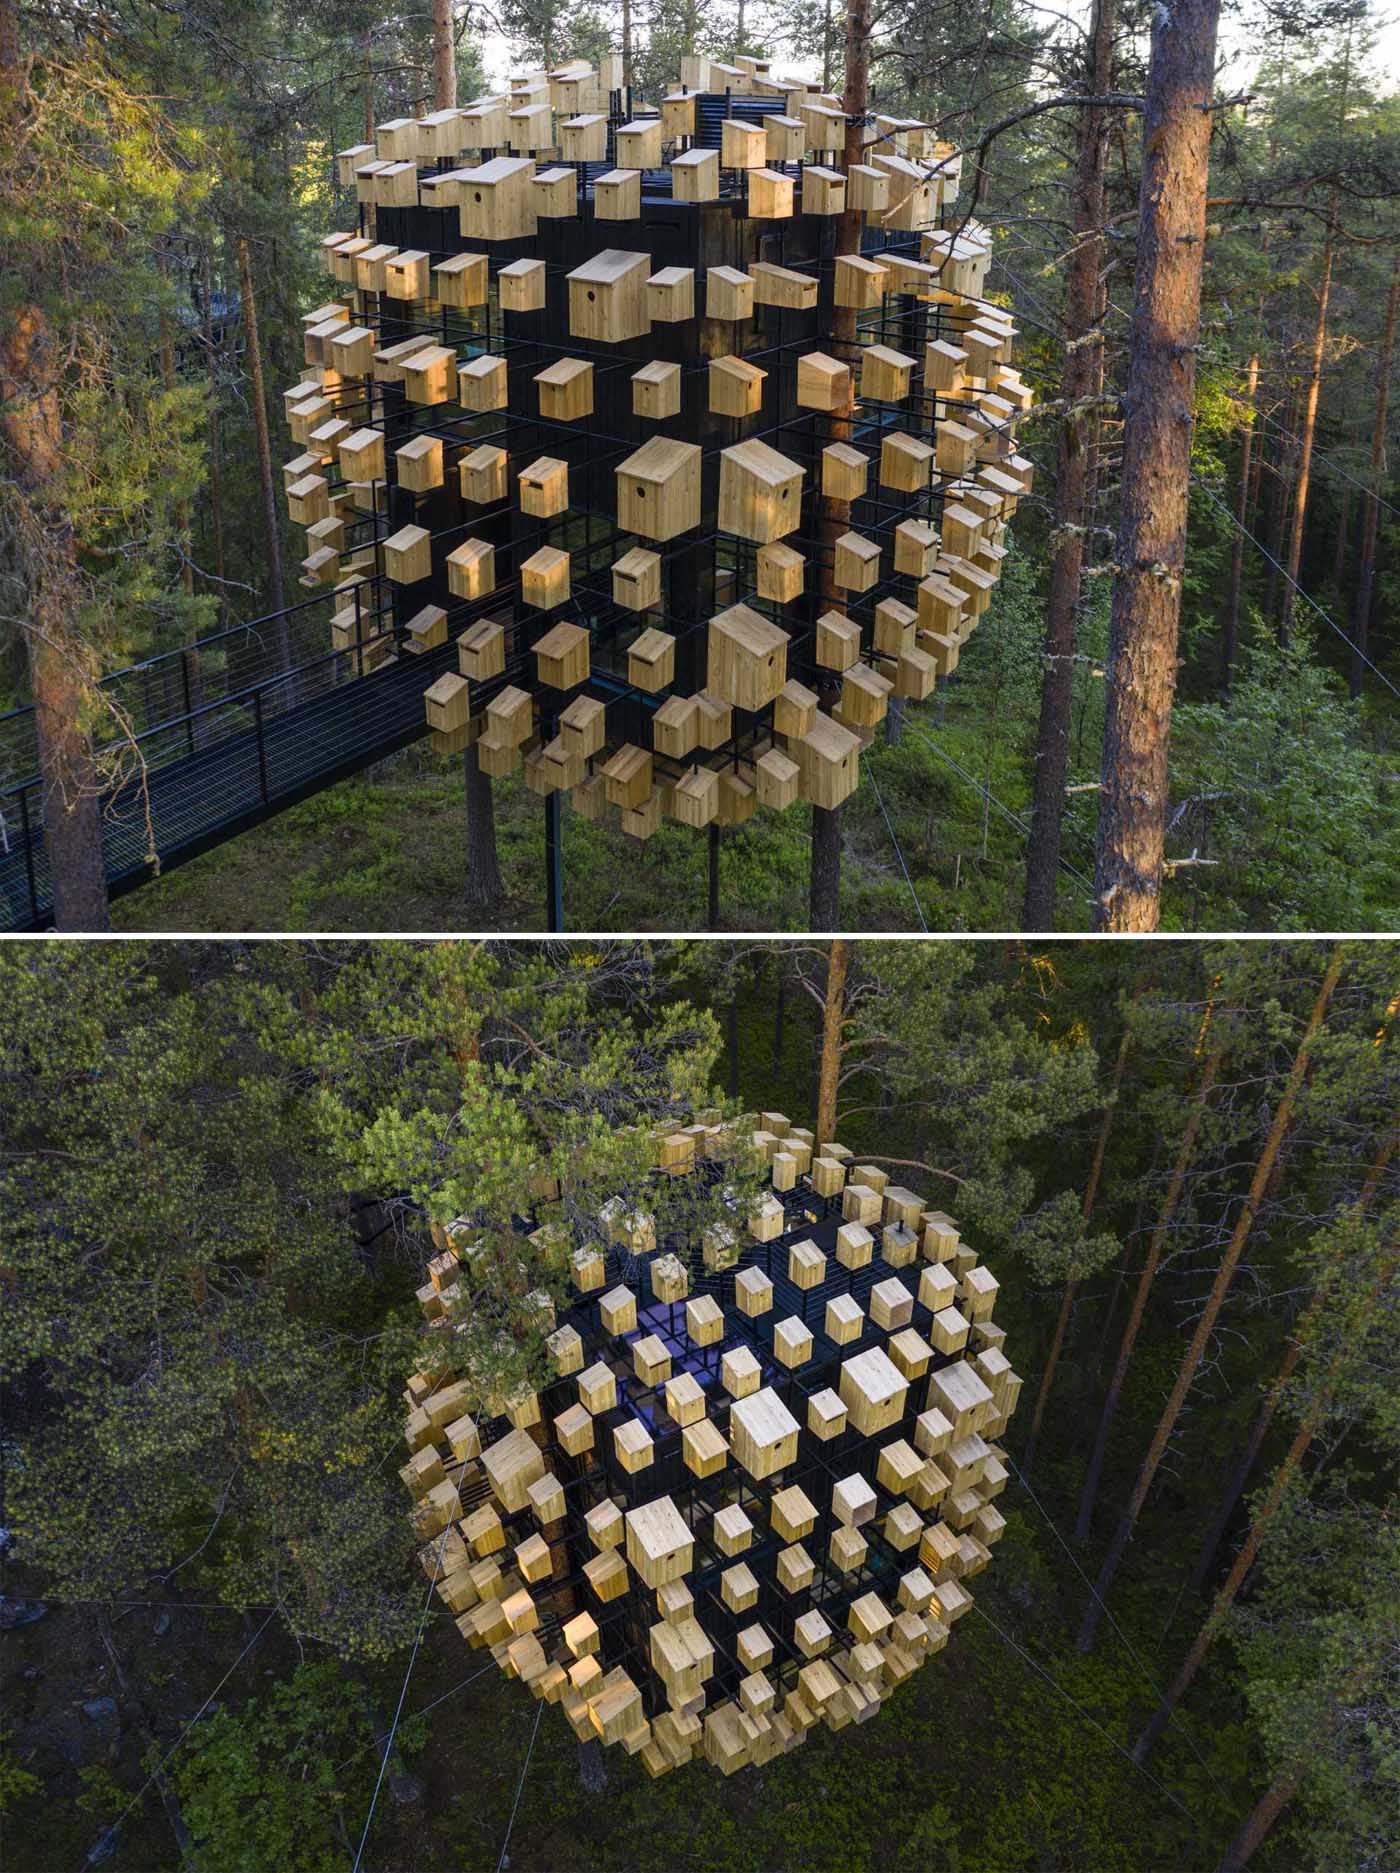 350 bird houses cover a suspended hotel room.